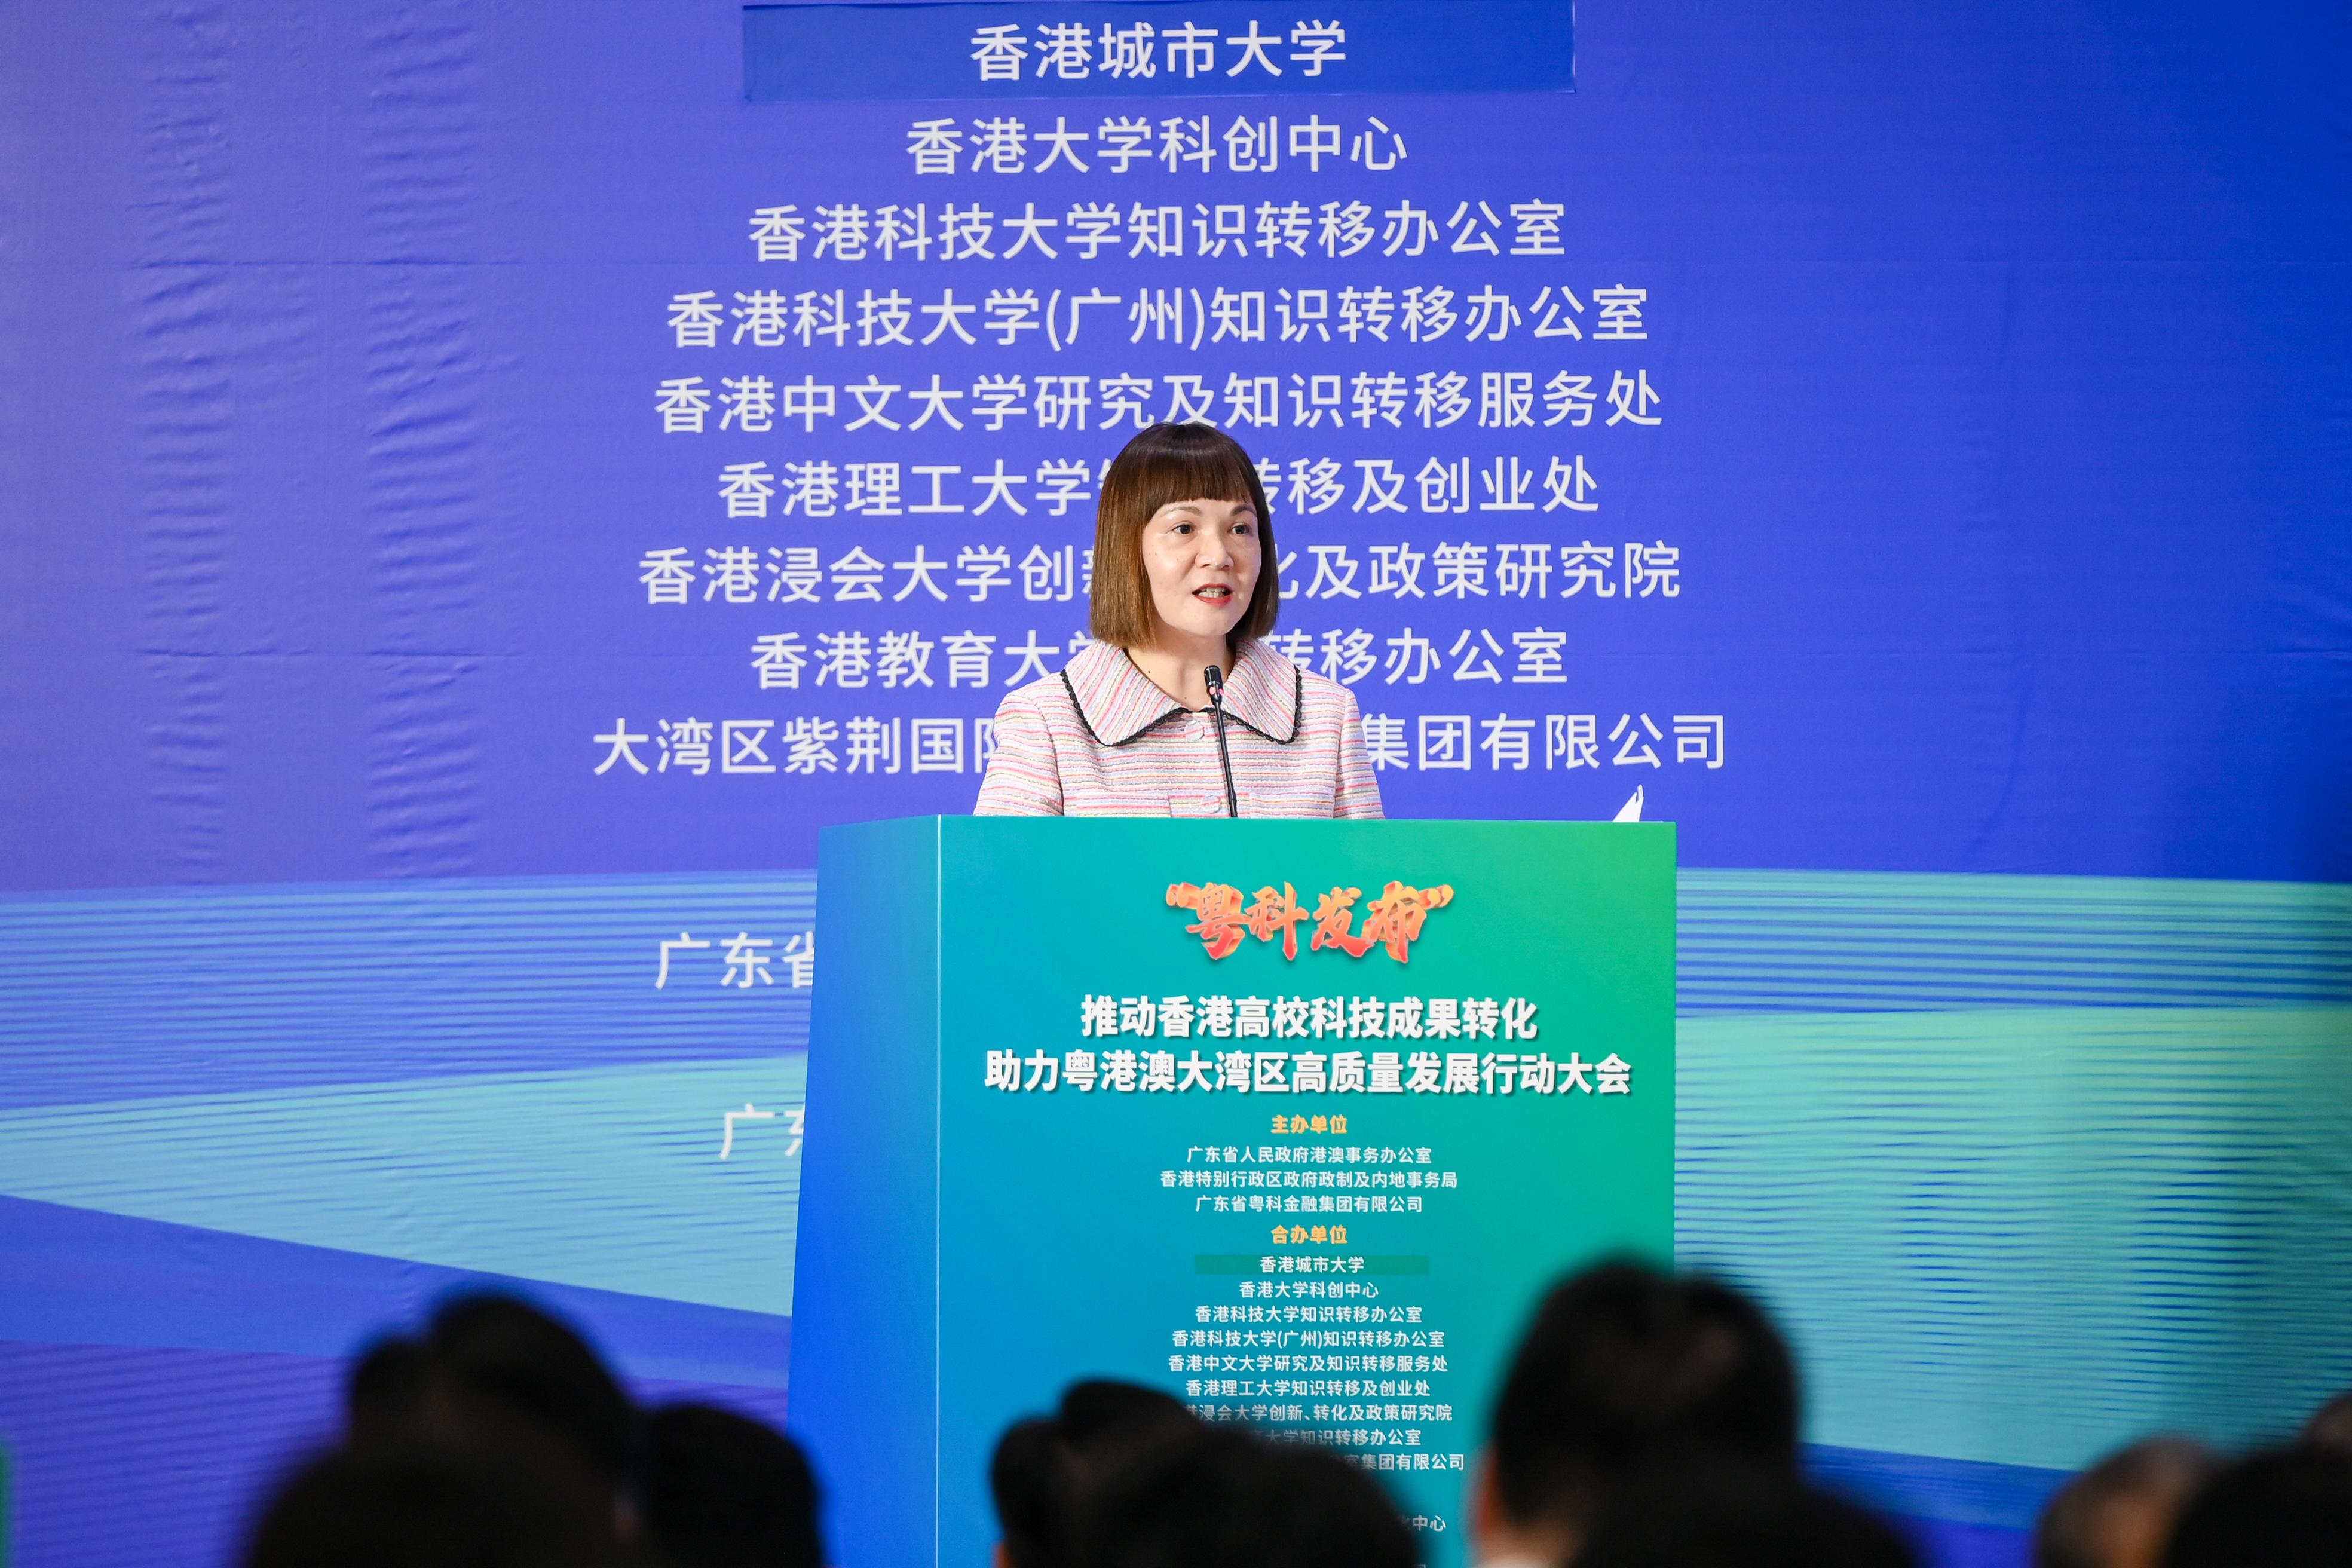 The Commissioner for the Development of the Guangdong-Hong Kong-Macao Greater Bay Area, Ms Maisie Chan, speaks at a conference to promote the transformation of scientific and technological achievements of Hong Kong tertiary institutions and support the high-quality development of the Guangdong-Hong Kong-Macao Greater Bay Area in Guangzhou today (May 17).